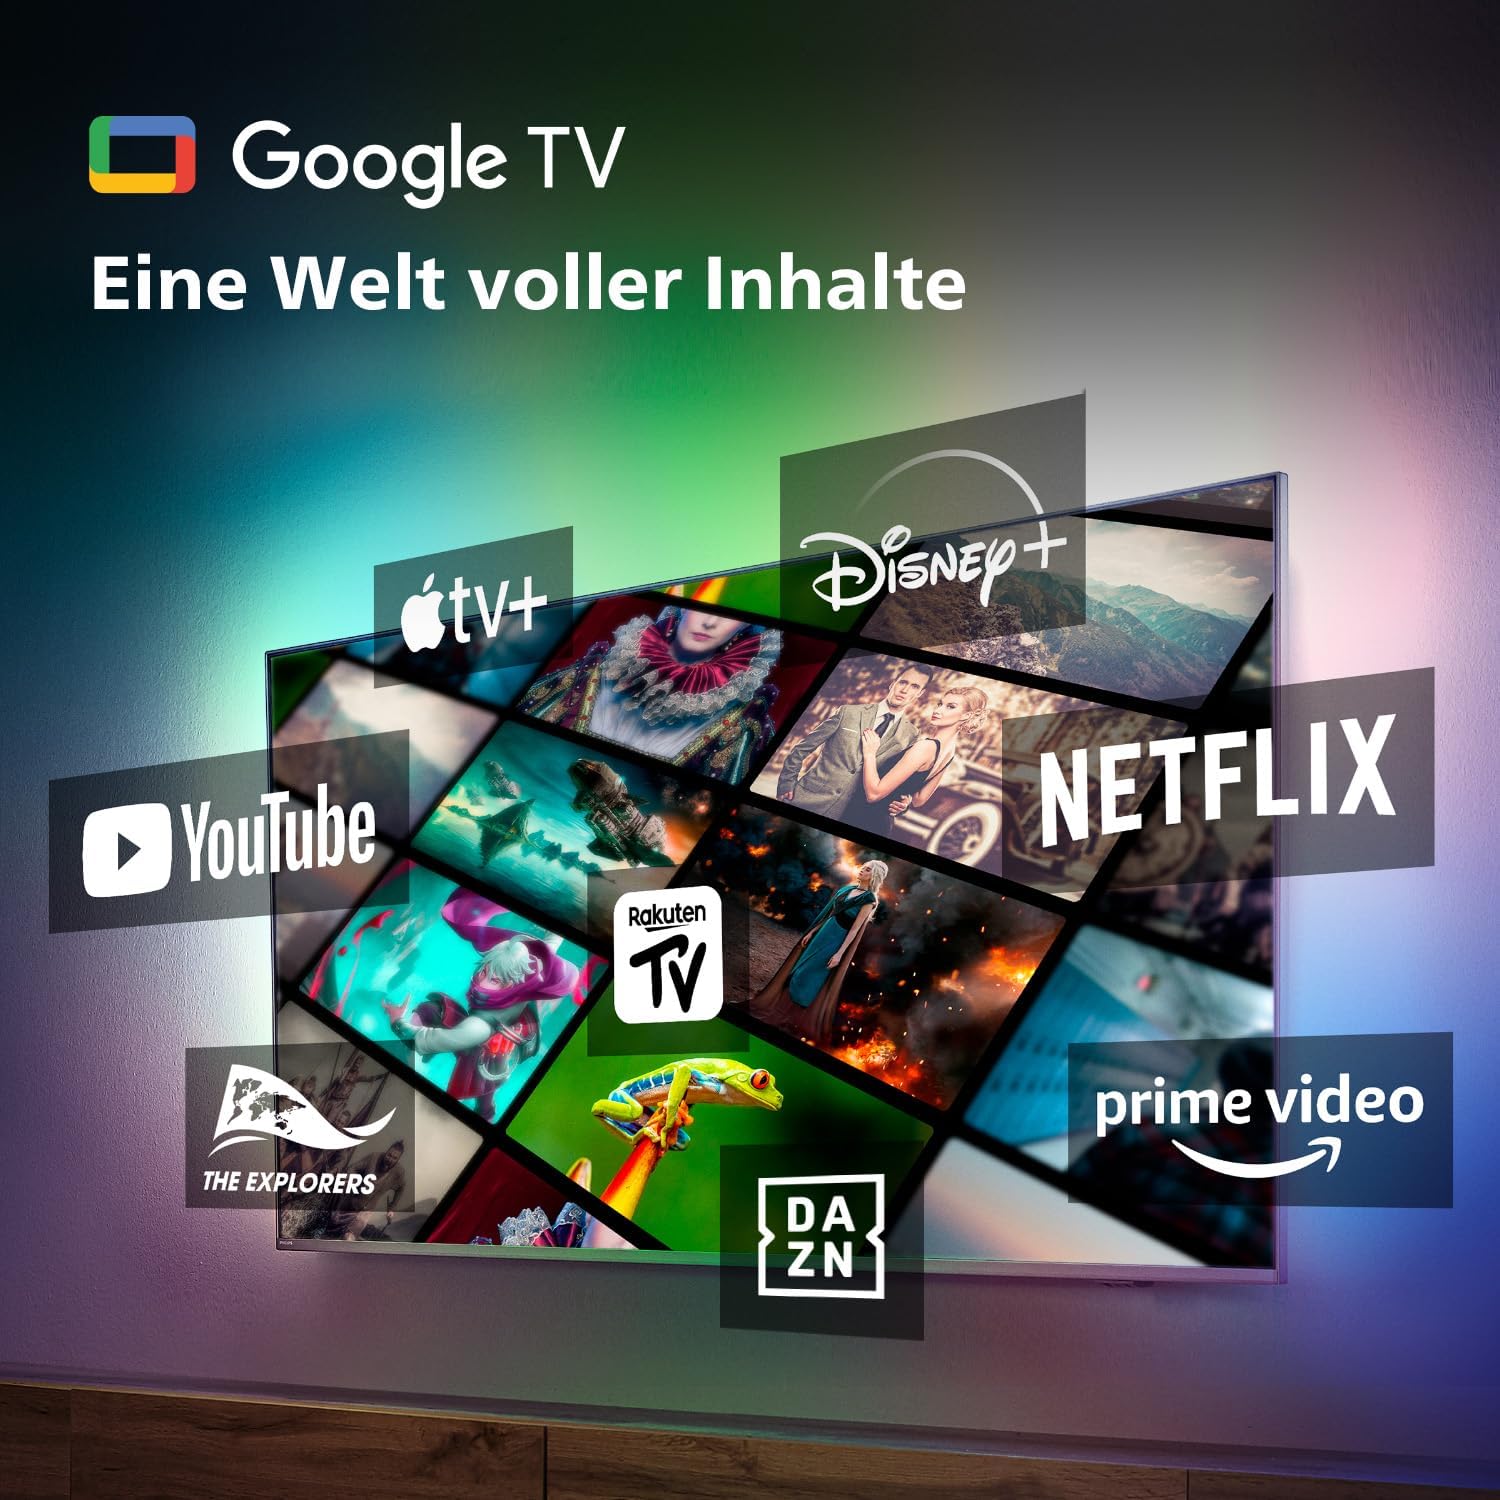 Philips 48OLED708 4K-Fernseher  HDR  3.840 x 2.160 Pixel  48 Zoll 